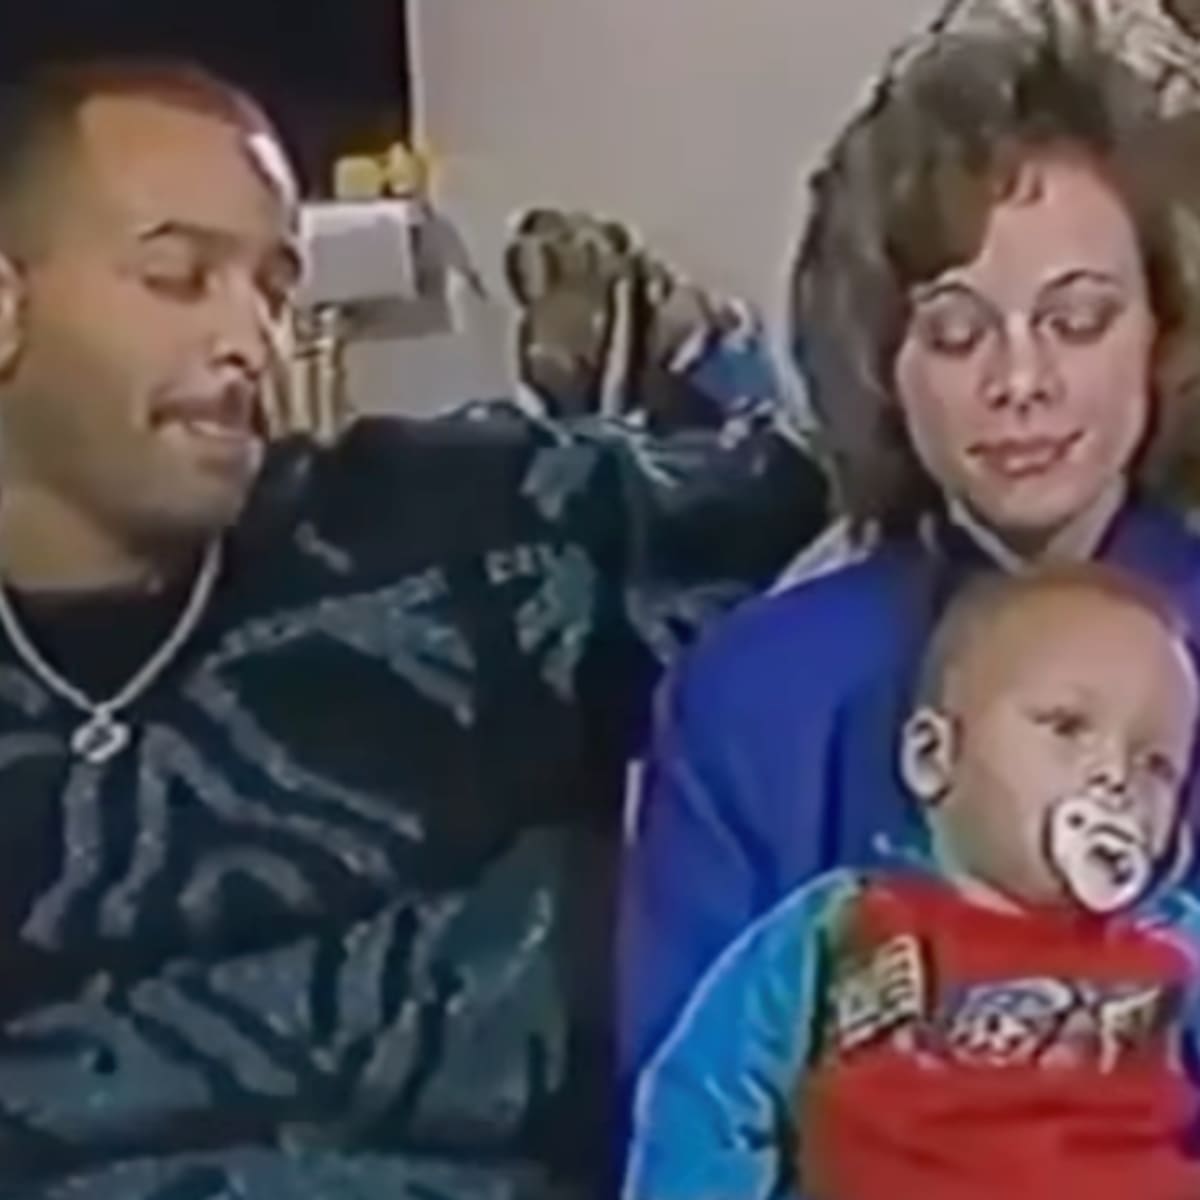 Super good': RVA's Baby Steph meets real Steph Curry